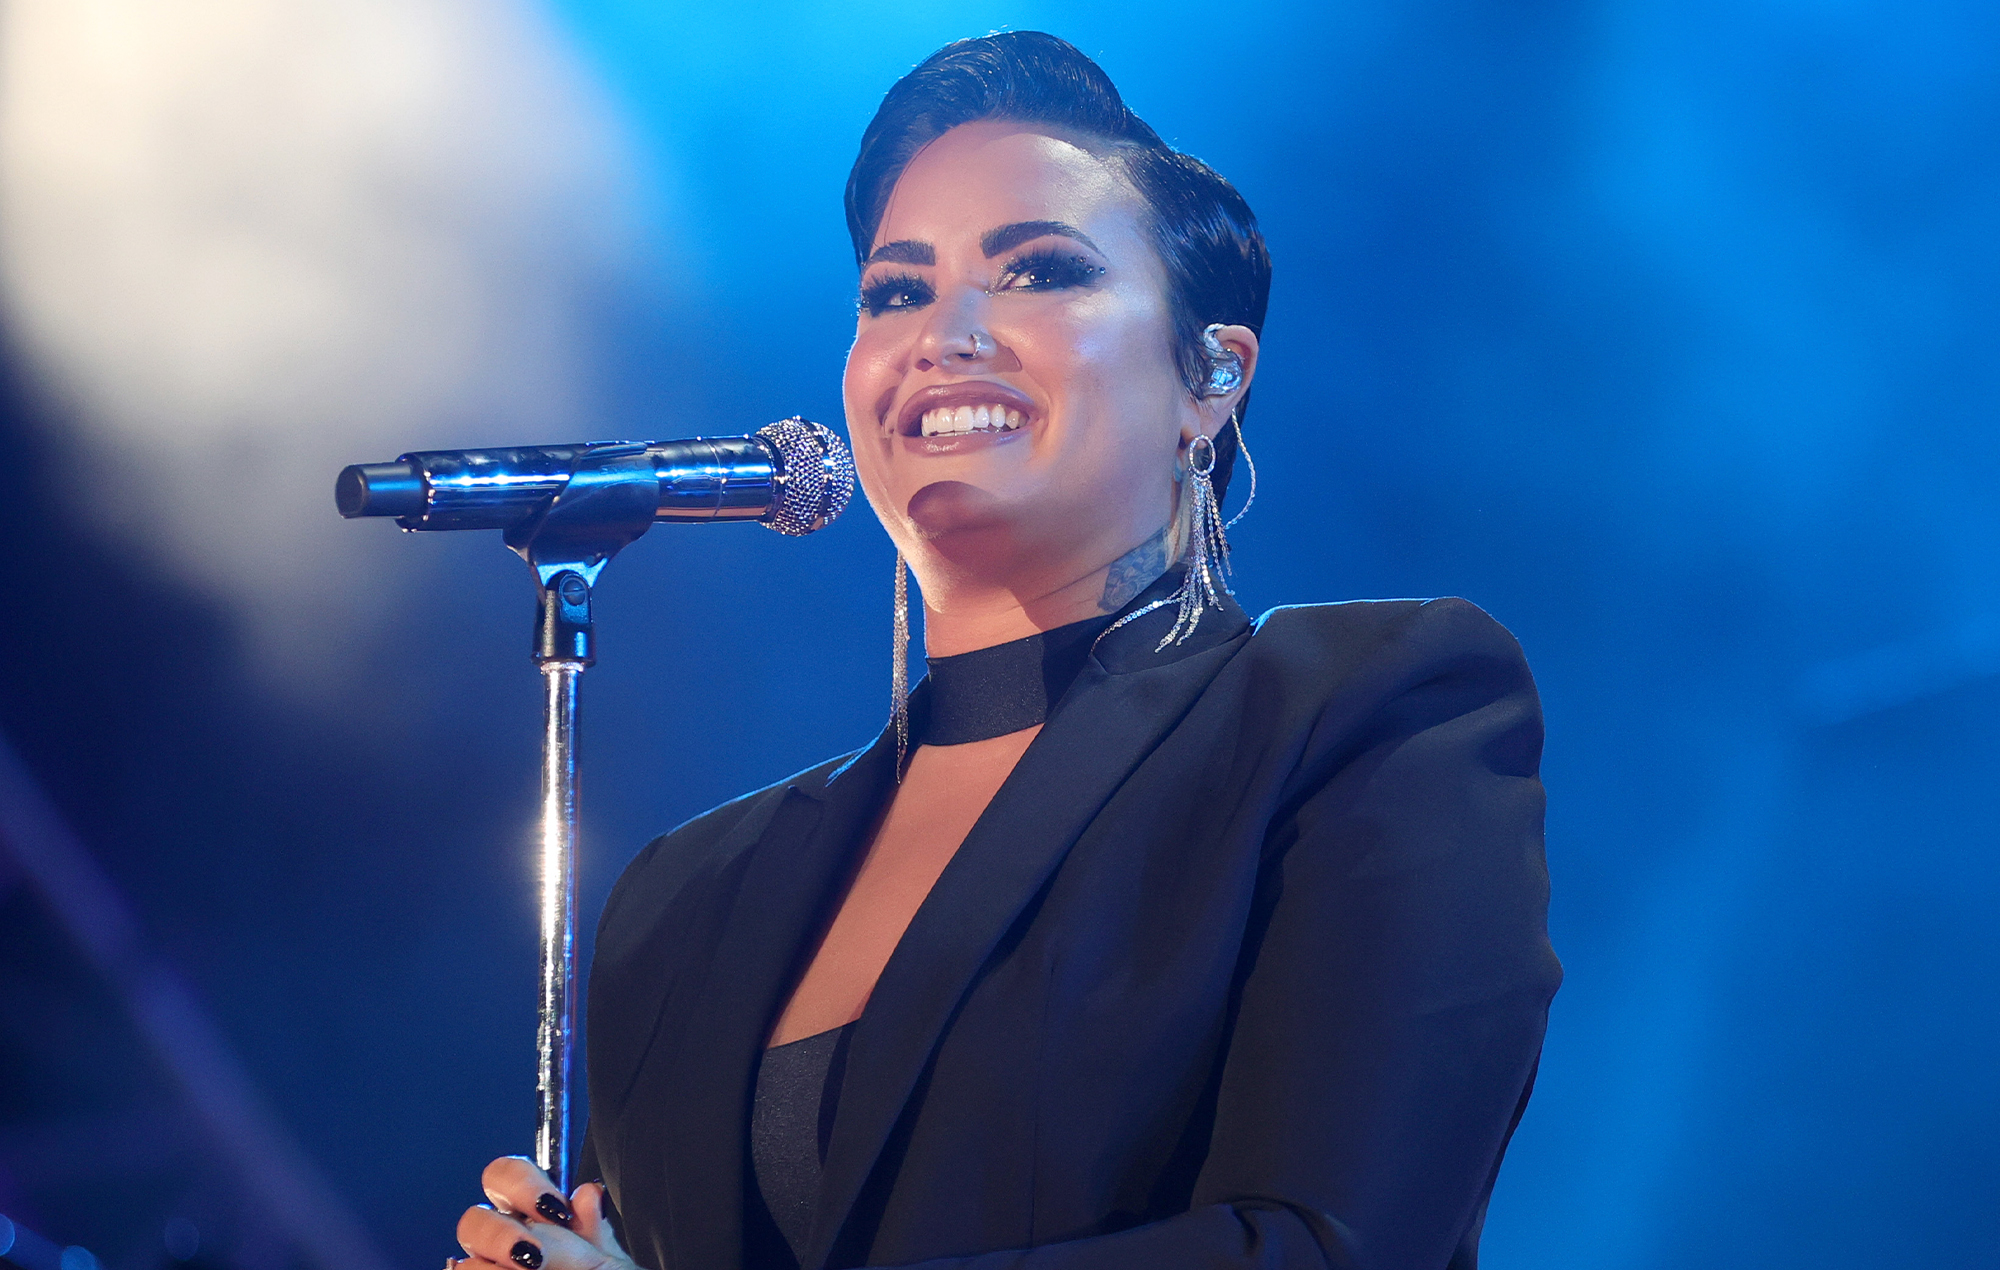 ‘Holy Fvck’ Tour to be Demi Lovato's last